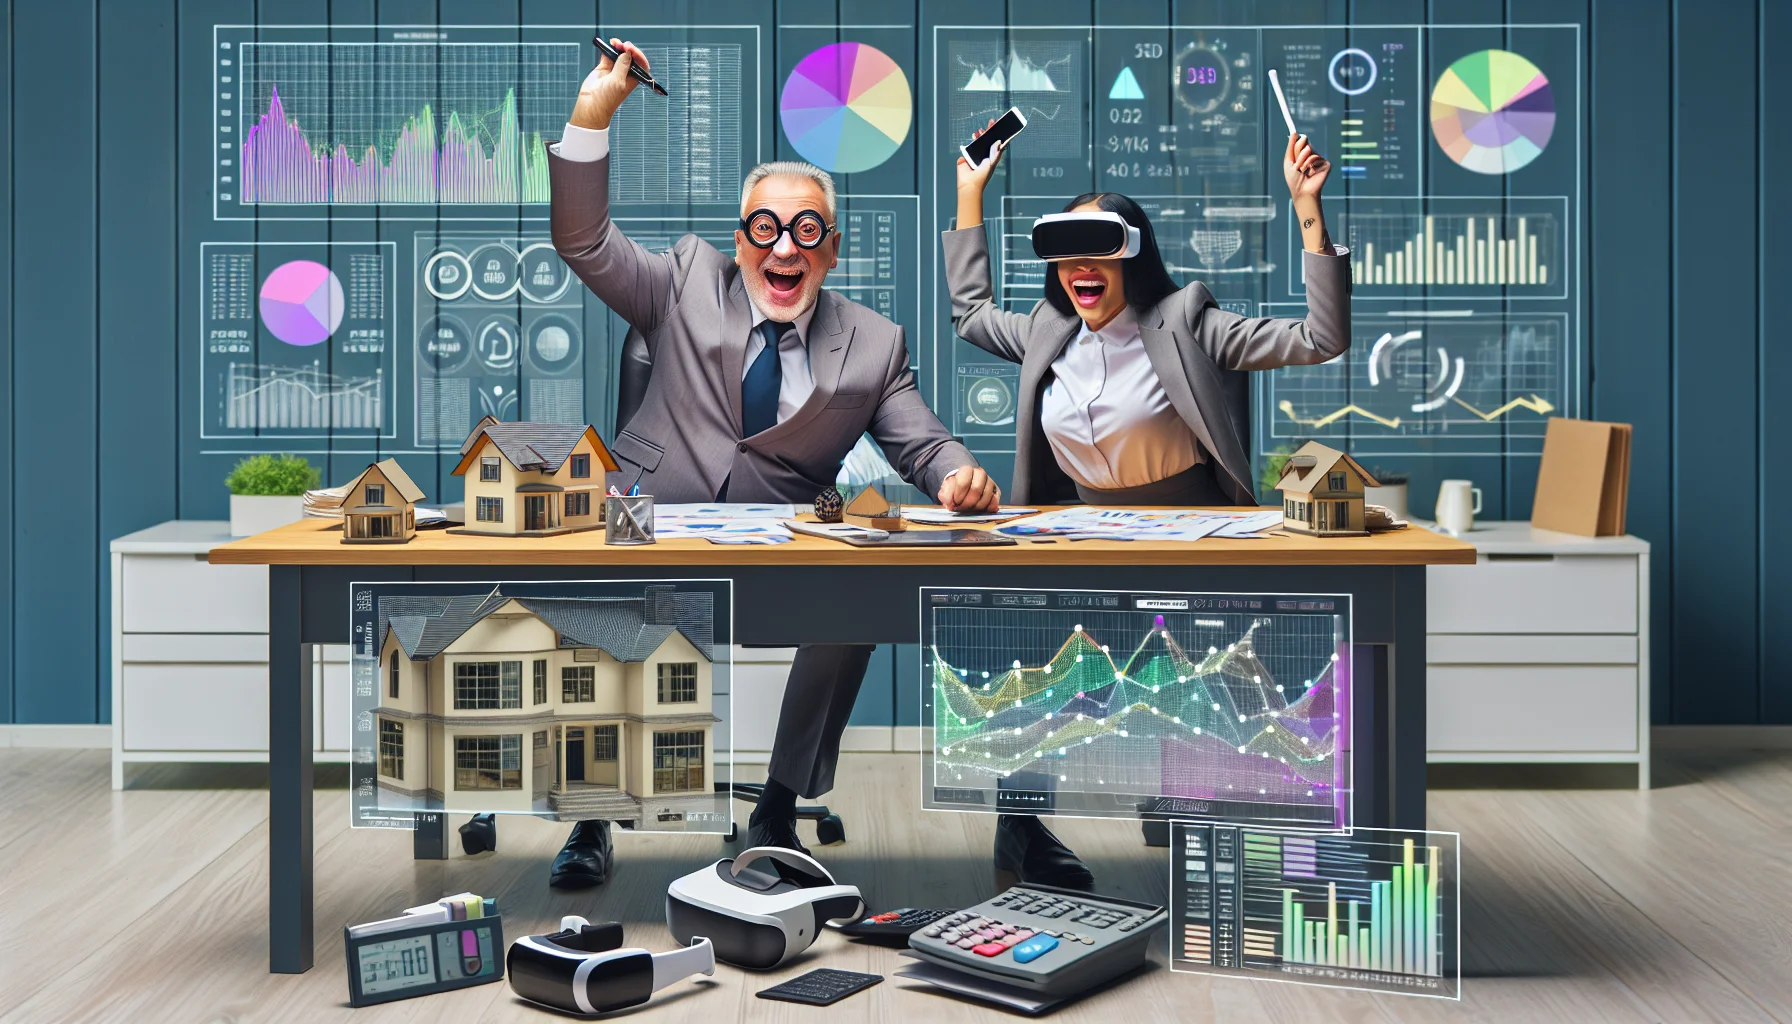 Imagine a humorous real estate market analysis scene. Visualize a pristine, ideally organized office filled with up-to-date technology. On a large desk, an array of different tools are scattered: color-coded graphs representing current market trends, interactive 3D models of houses, augmented reality goggles for virtual property tours, and advanced calculators for complex financial estimations. A middle-aged Caucasian man with glasses and a young Black woman wearing professional attire are seen jubilantly raising their respective tools of trade - a digital pen and a tablet respectively, signifying a successful real estate deal.